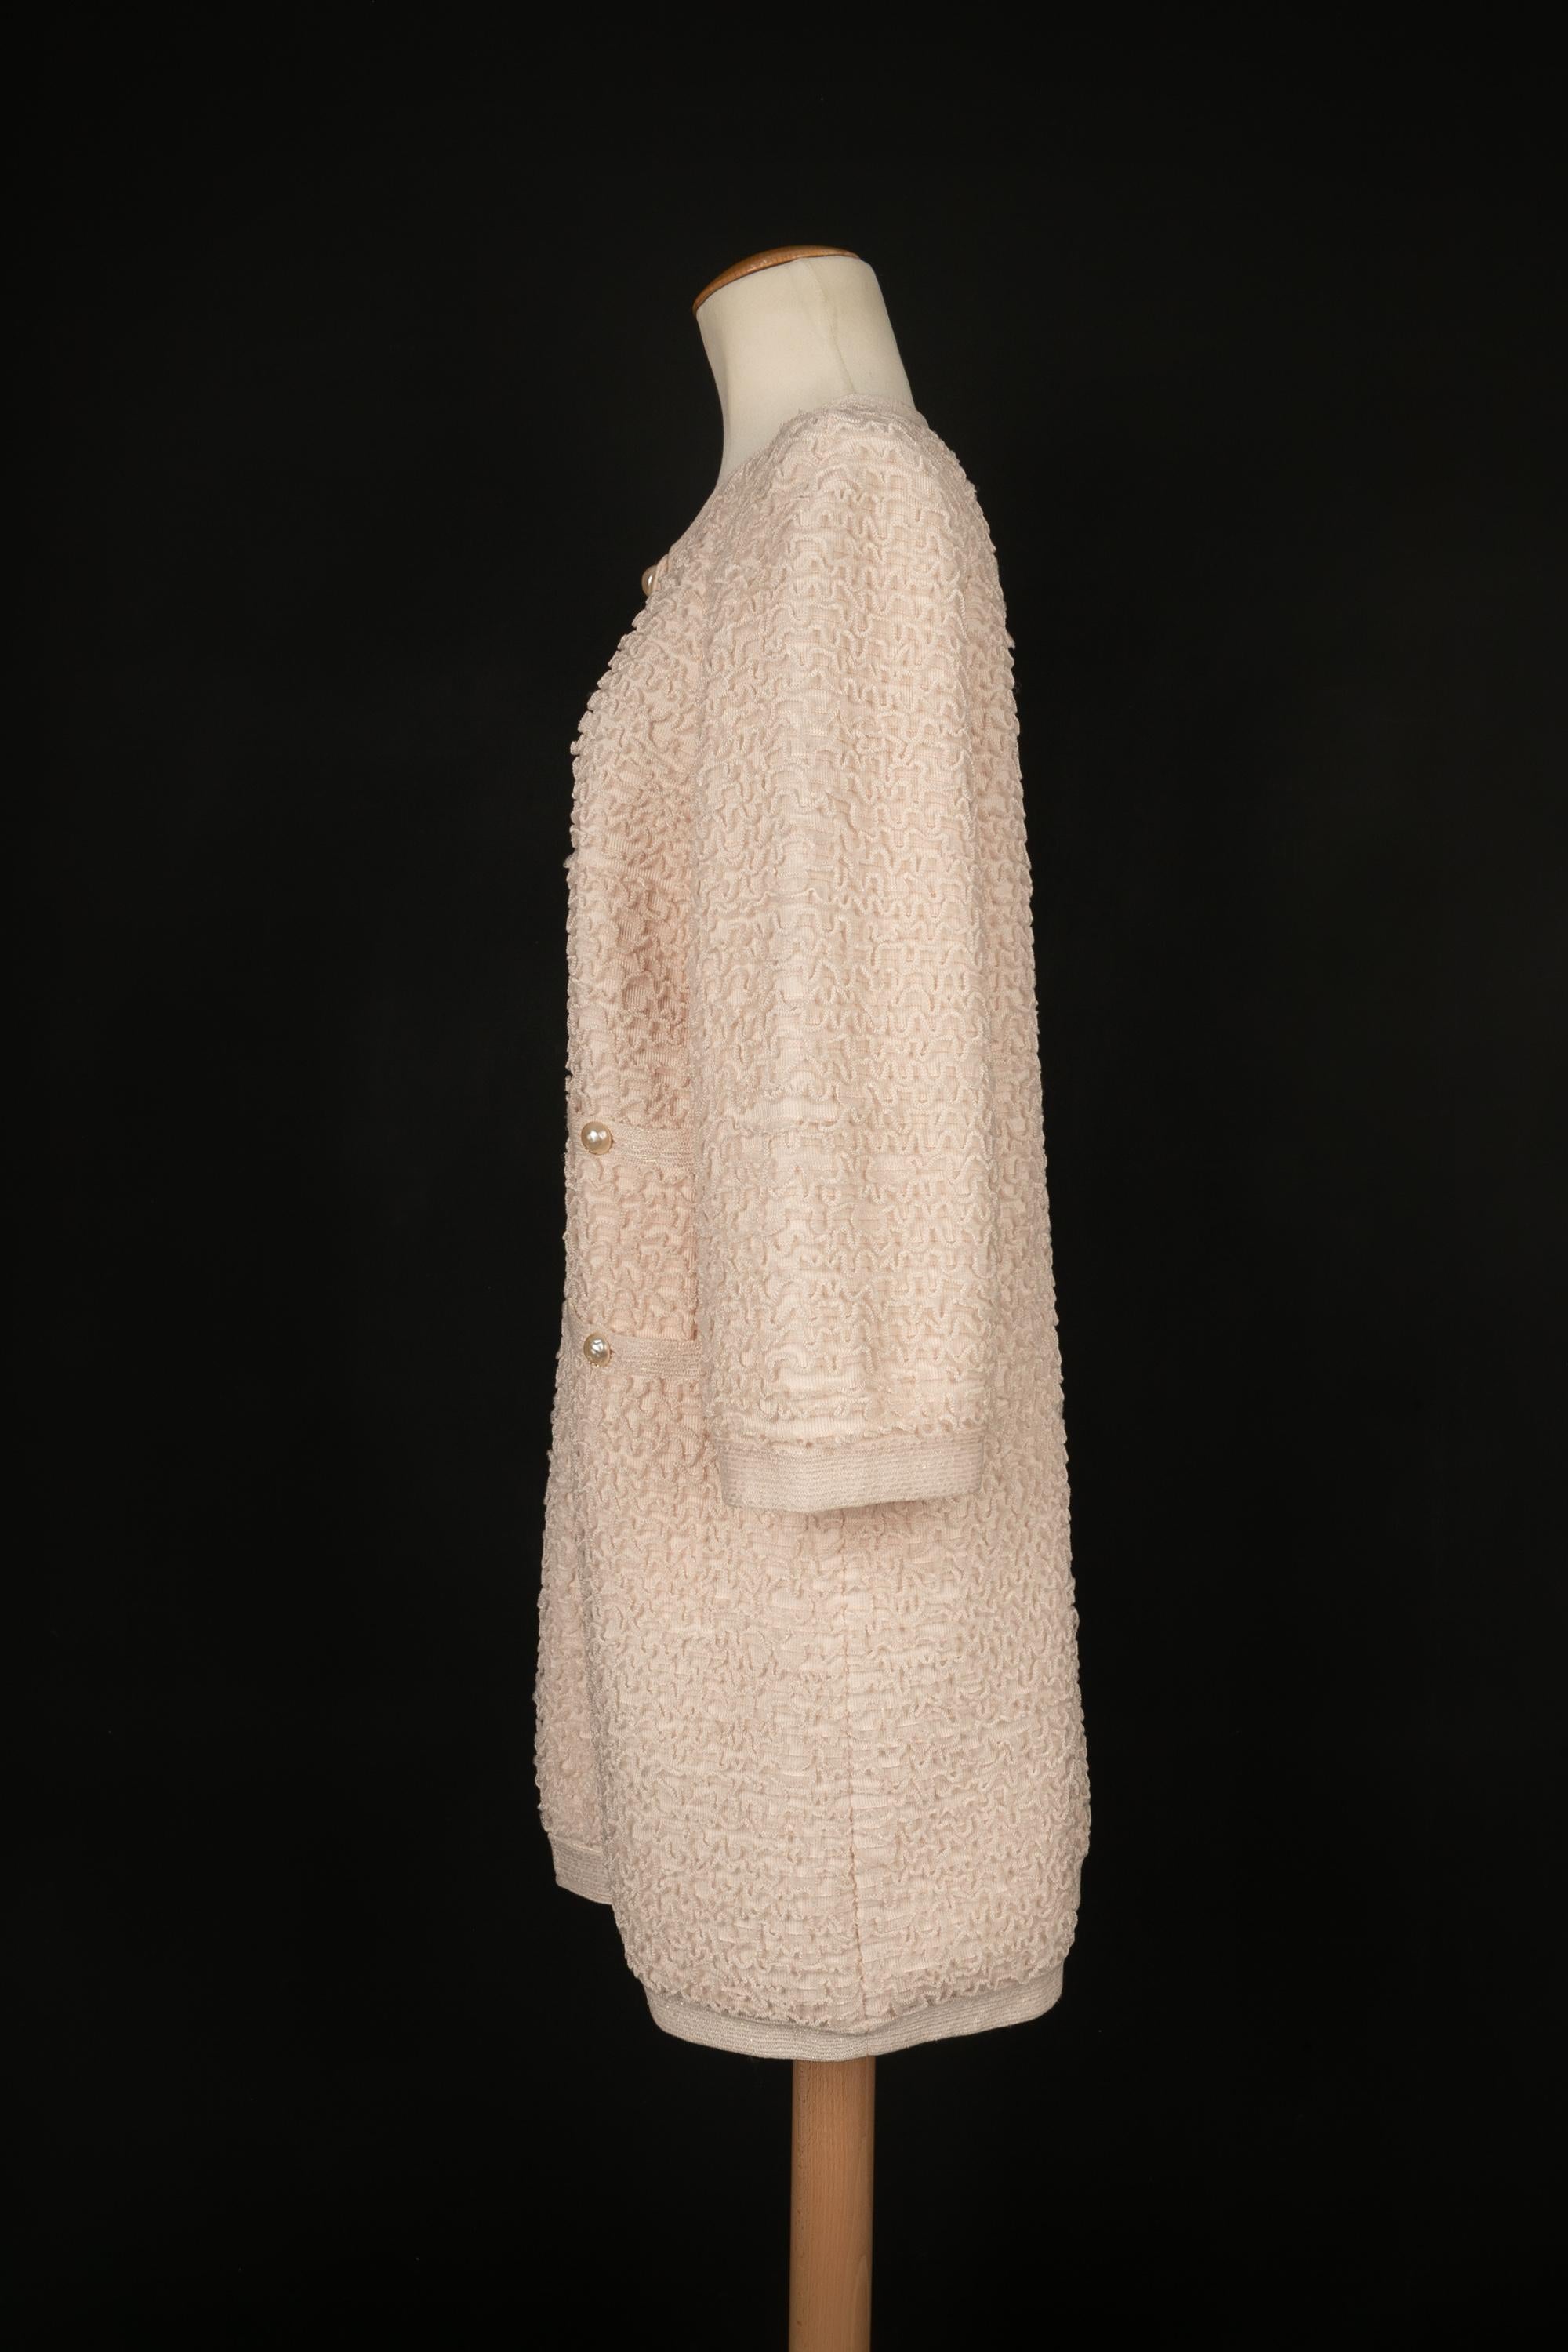 CHANEL - (Made in Italy) Powder pink long cardigan ornamented with costume pearl buttons. 40FR size indicated. 2012 Spring-Summer Collection.

Condition:
Very good condition

Dimensions:
Shoulder width: 40 cm - Chest: 50 cm - Sleeve length: 53 cm -